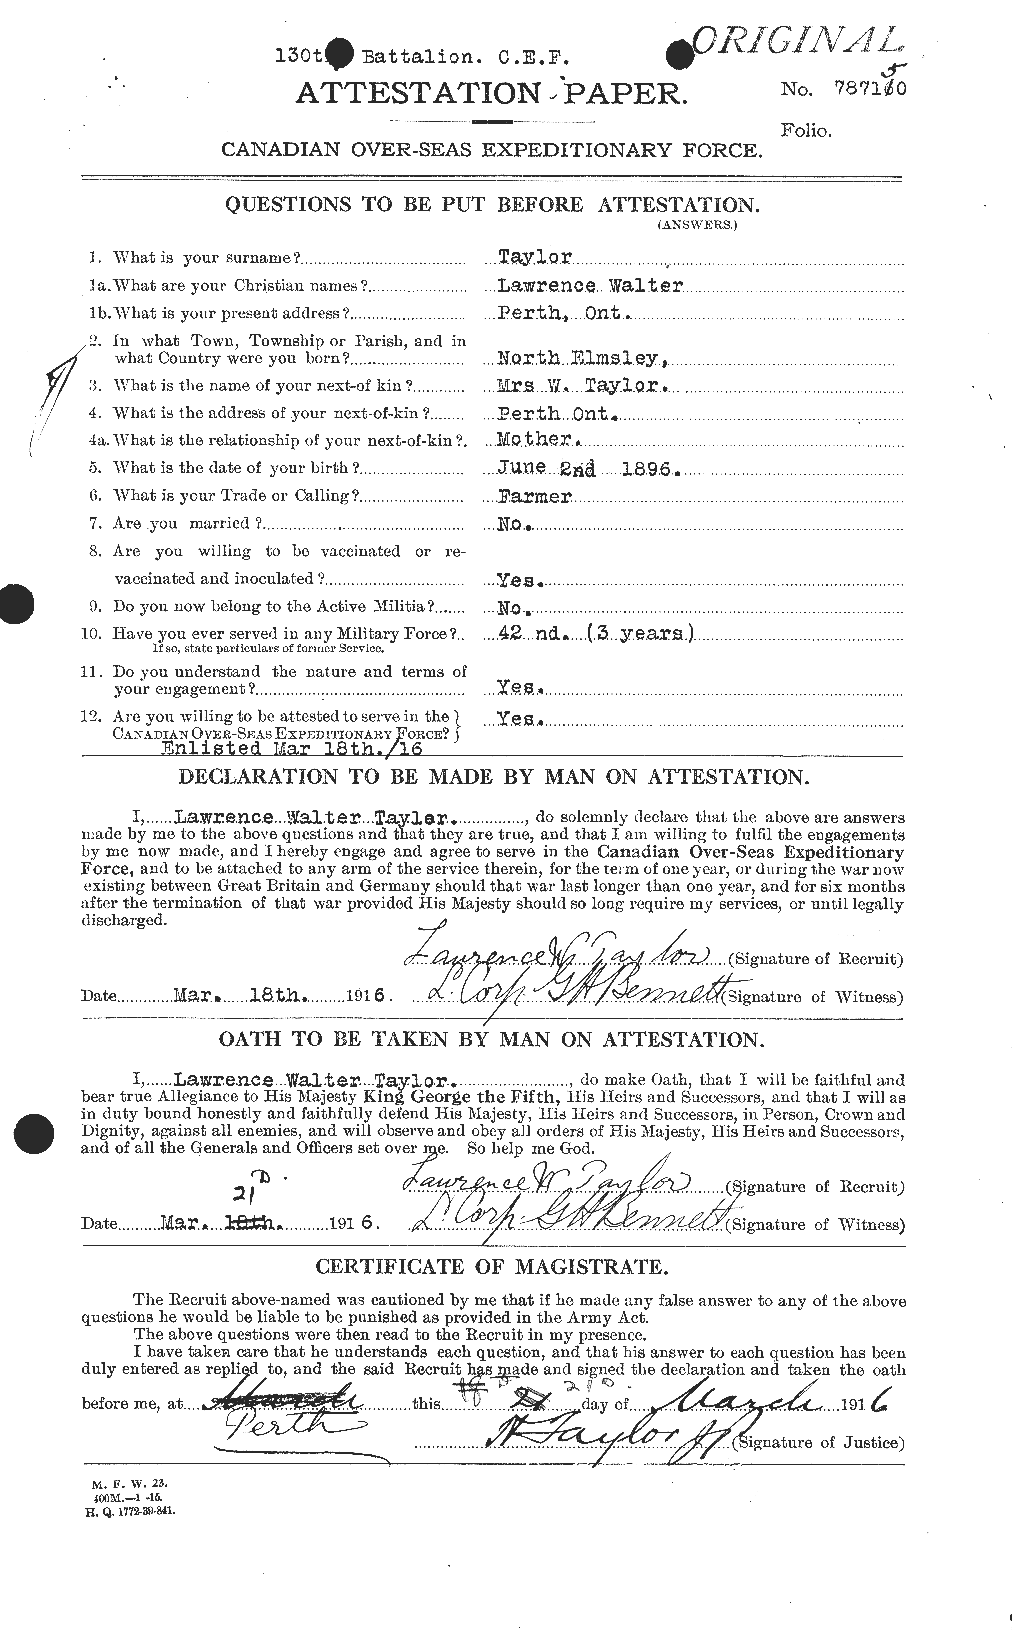 Personnel Records of the First World War - CEF 627615a